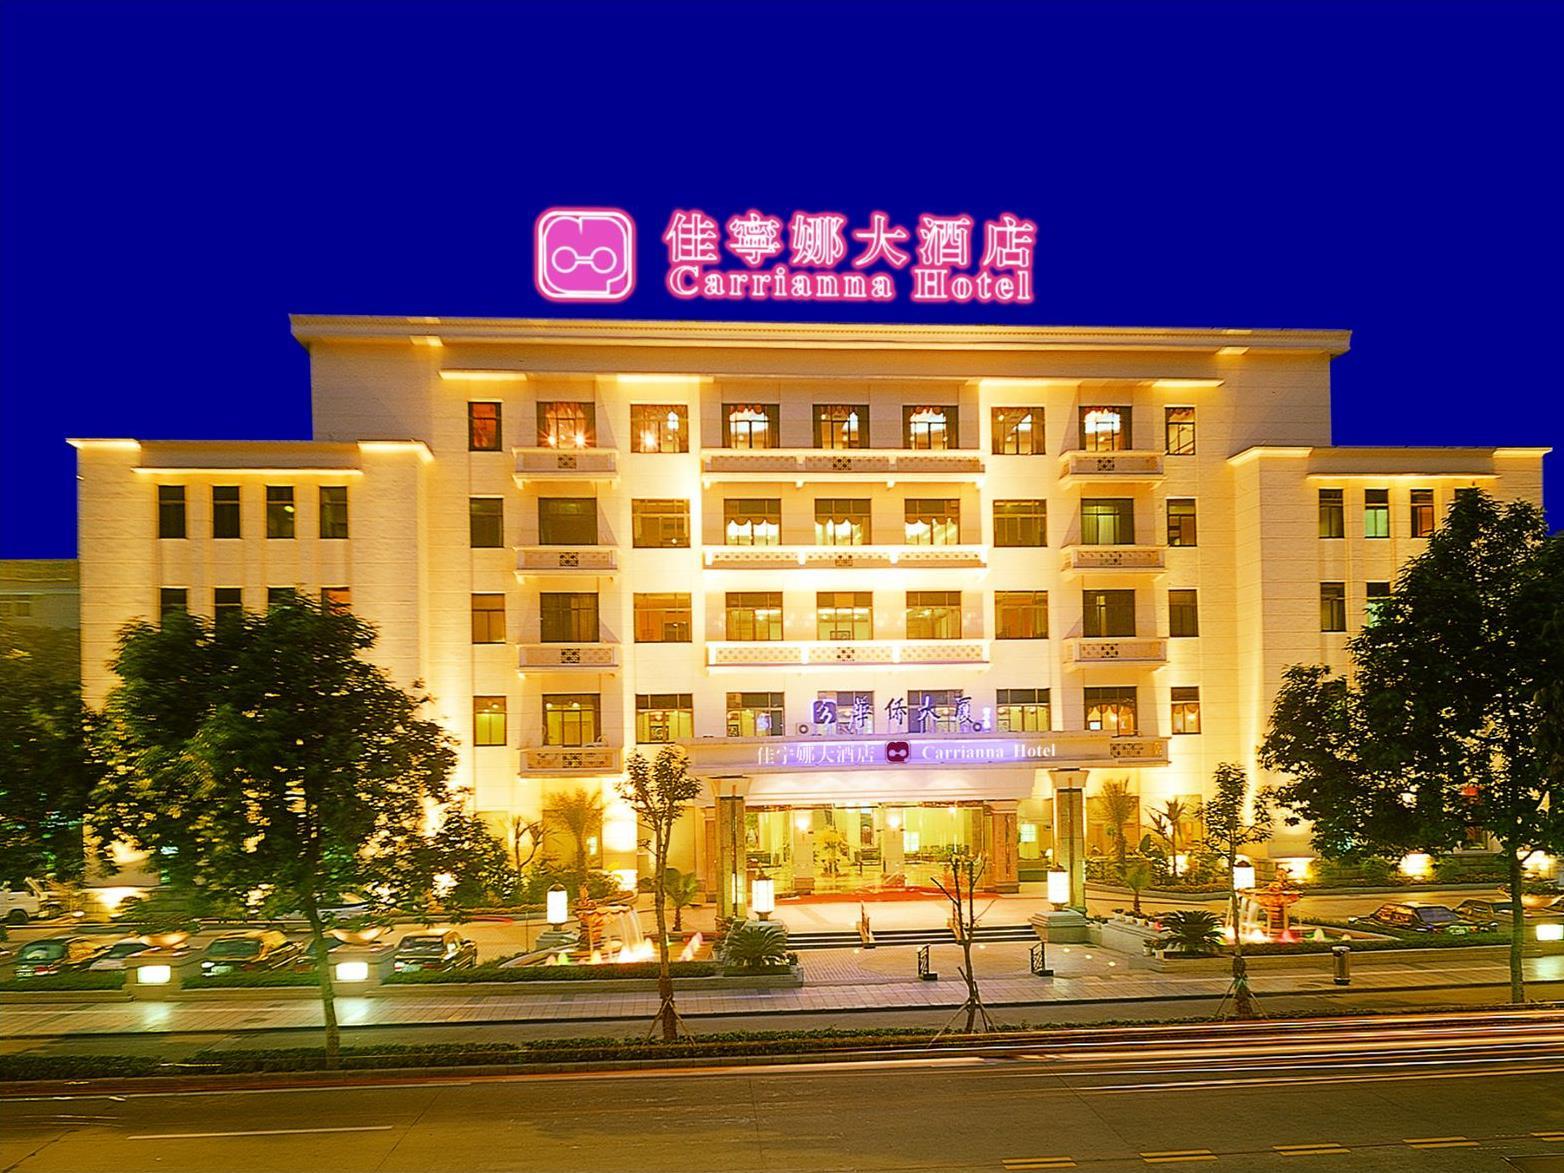 Carrianna Hotel Foshan FAQ 2017, What facilities are there in Carrianna Hotel Foshan 2017, What Languages Spoken are Supported in Carrianna Hotel Foshan 2017, Which payment cards are accepted in Carrianna Hotel Foshan , Foshan Carrianna Hotel room facilities and services Q&A 2017, Foshan Carrianna Hotel online booking services 2017, Foshan Carrianna Hotel address 2017, Foshan Carrianna Hotel telephone number 2017,Foshan Carrianna Hotel map 2017, Foshan Carrianna Hotel traffic guide 2017, how to go Foshan Carrianna Hotel, Foshan Carrianna Hotel booking online 2017, Foshan Carrianna Hotel room types 2017.